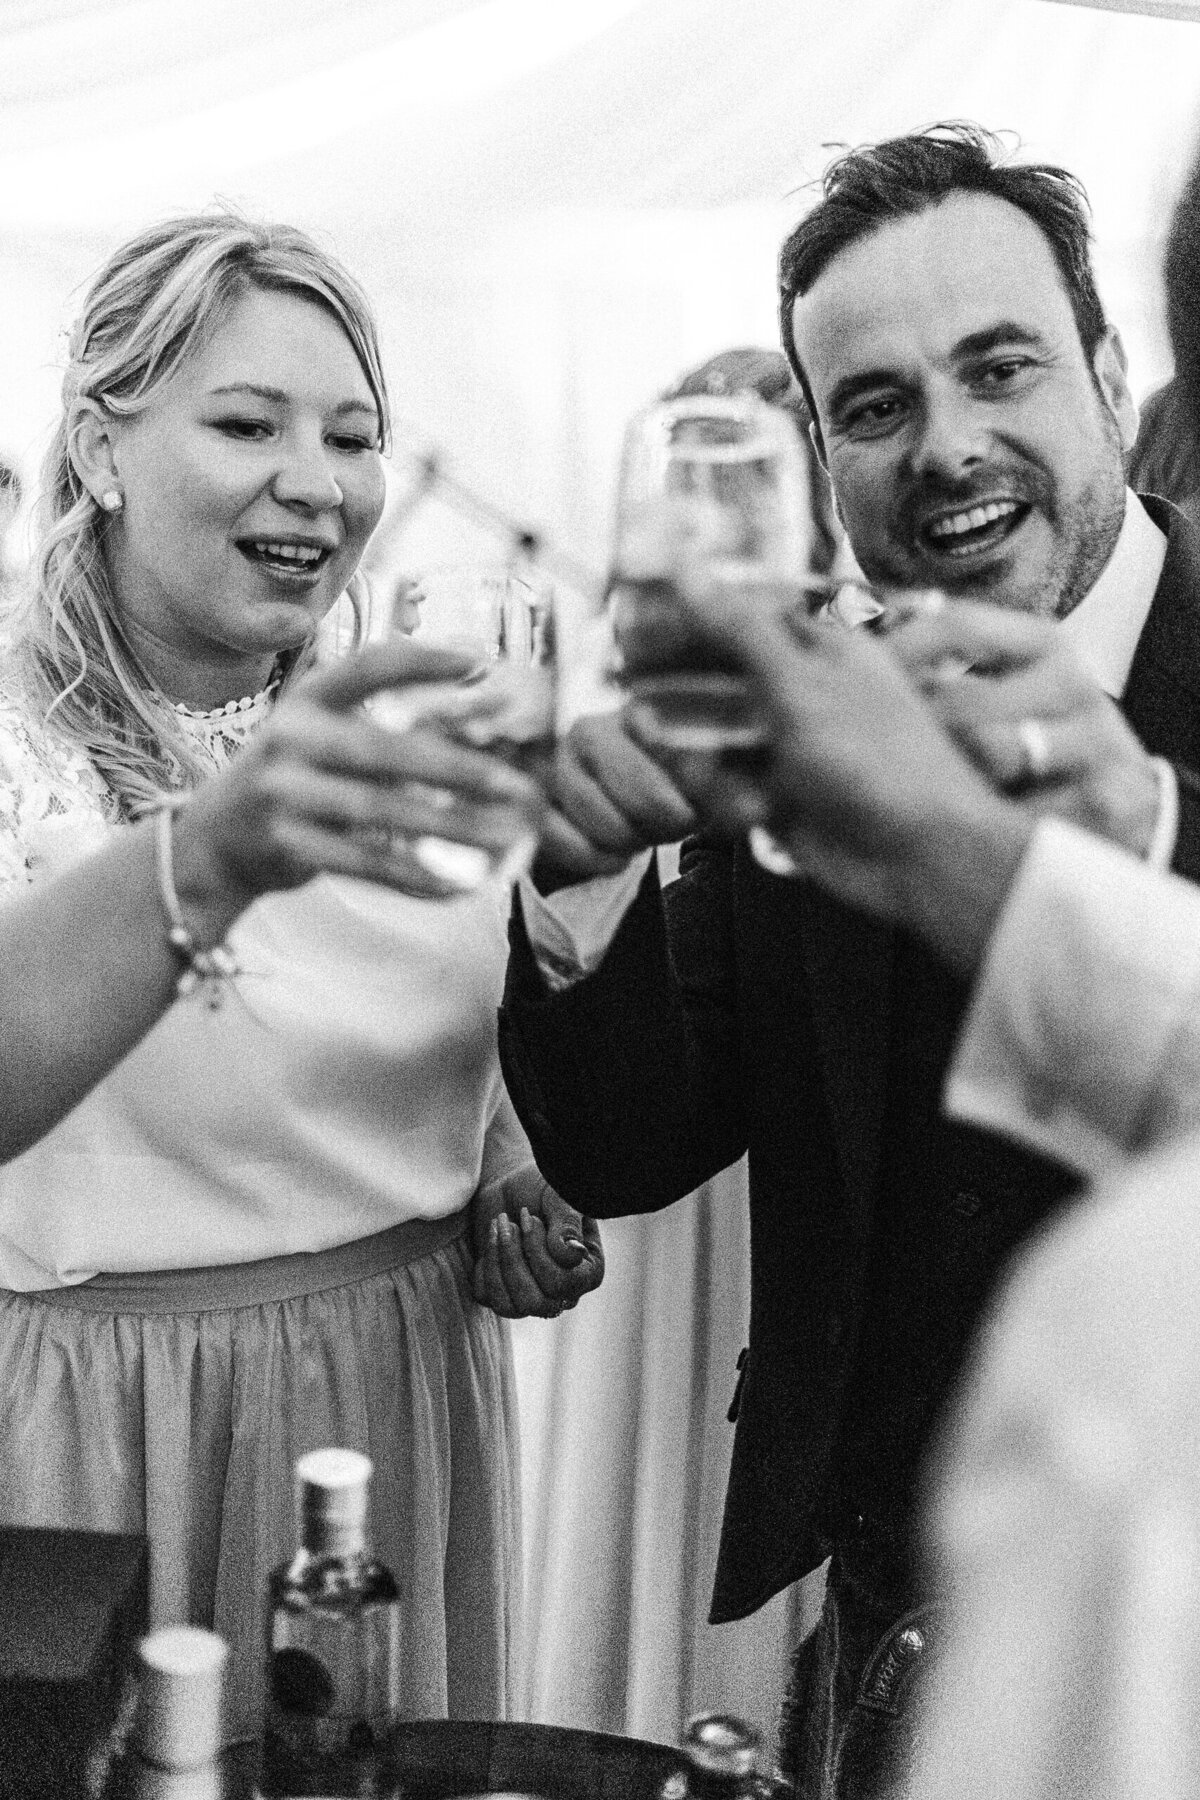 wedding guests cheers during wedding reception photographer catches this candid moment